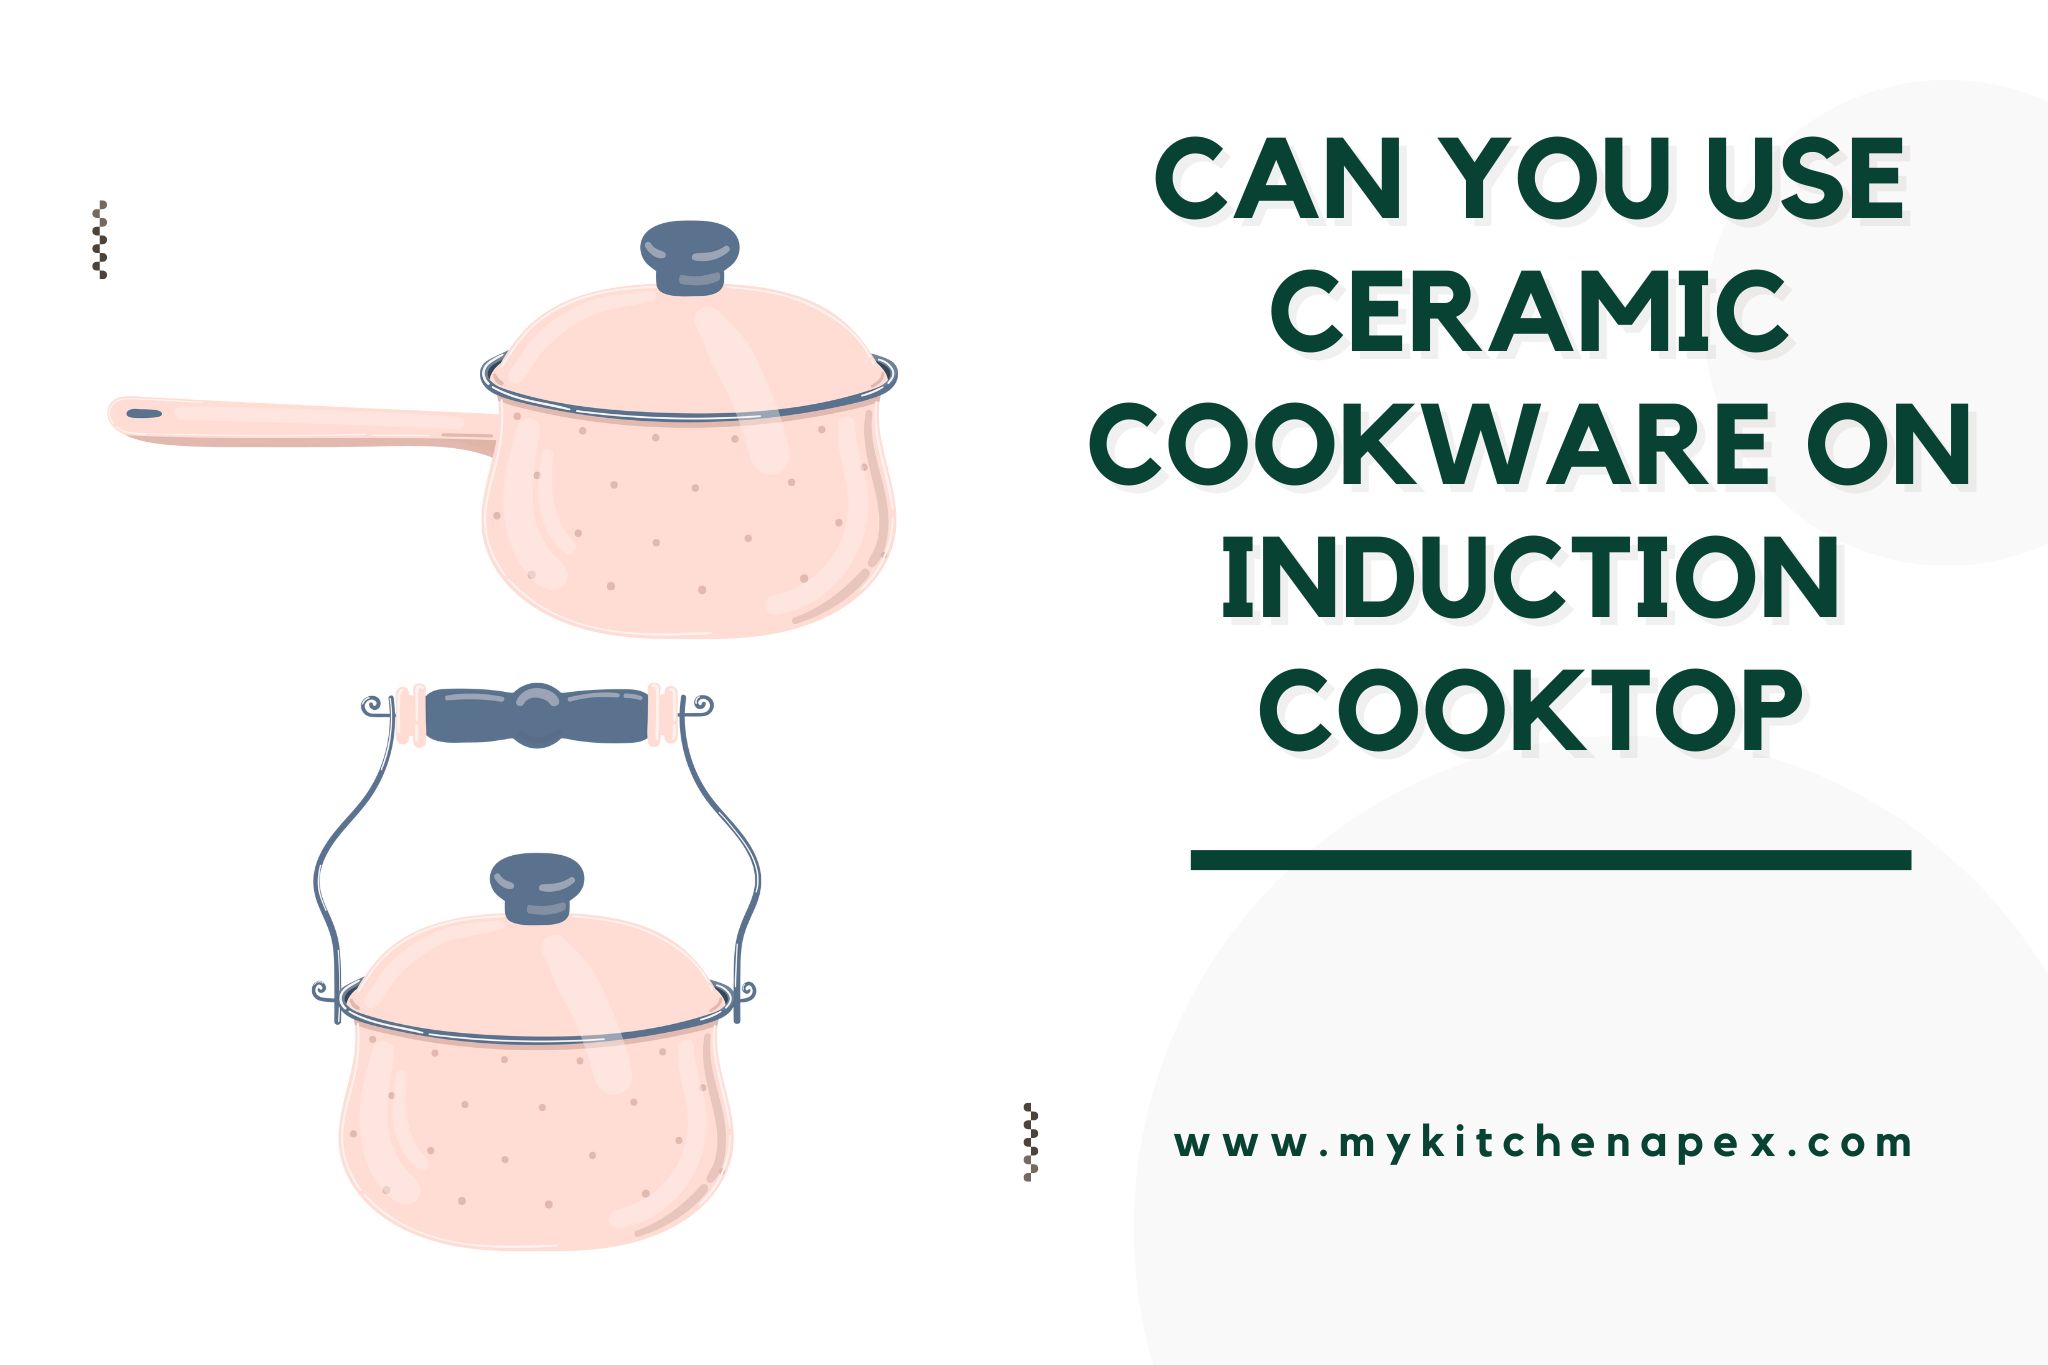 can you use ceramic cookware on induction cooktop